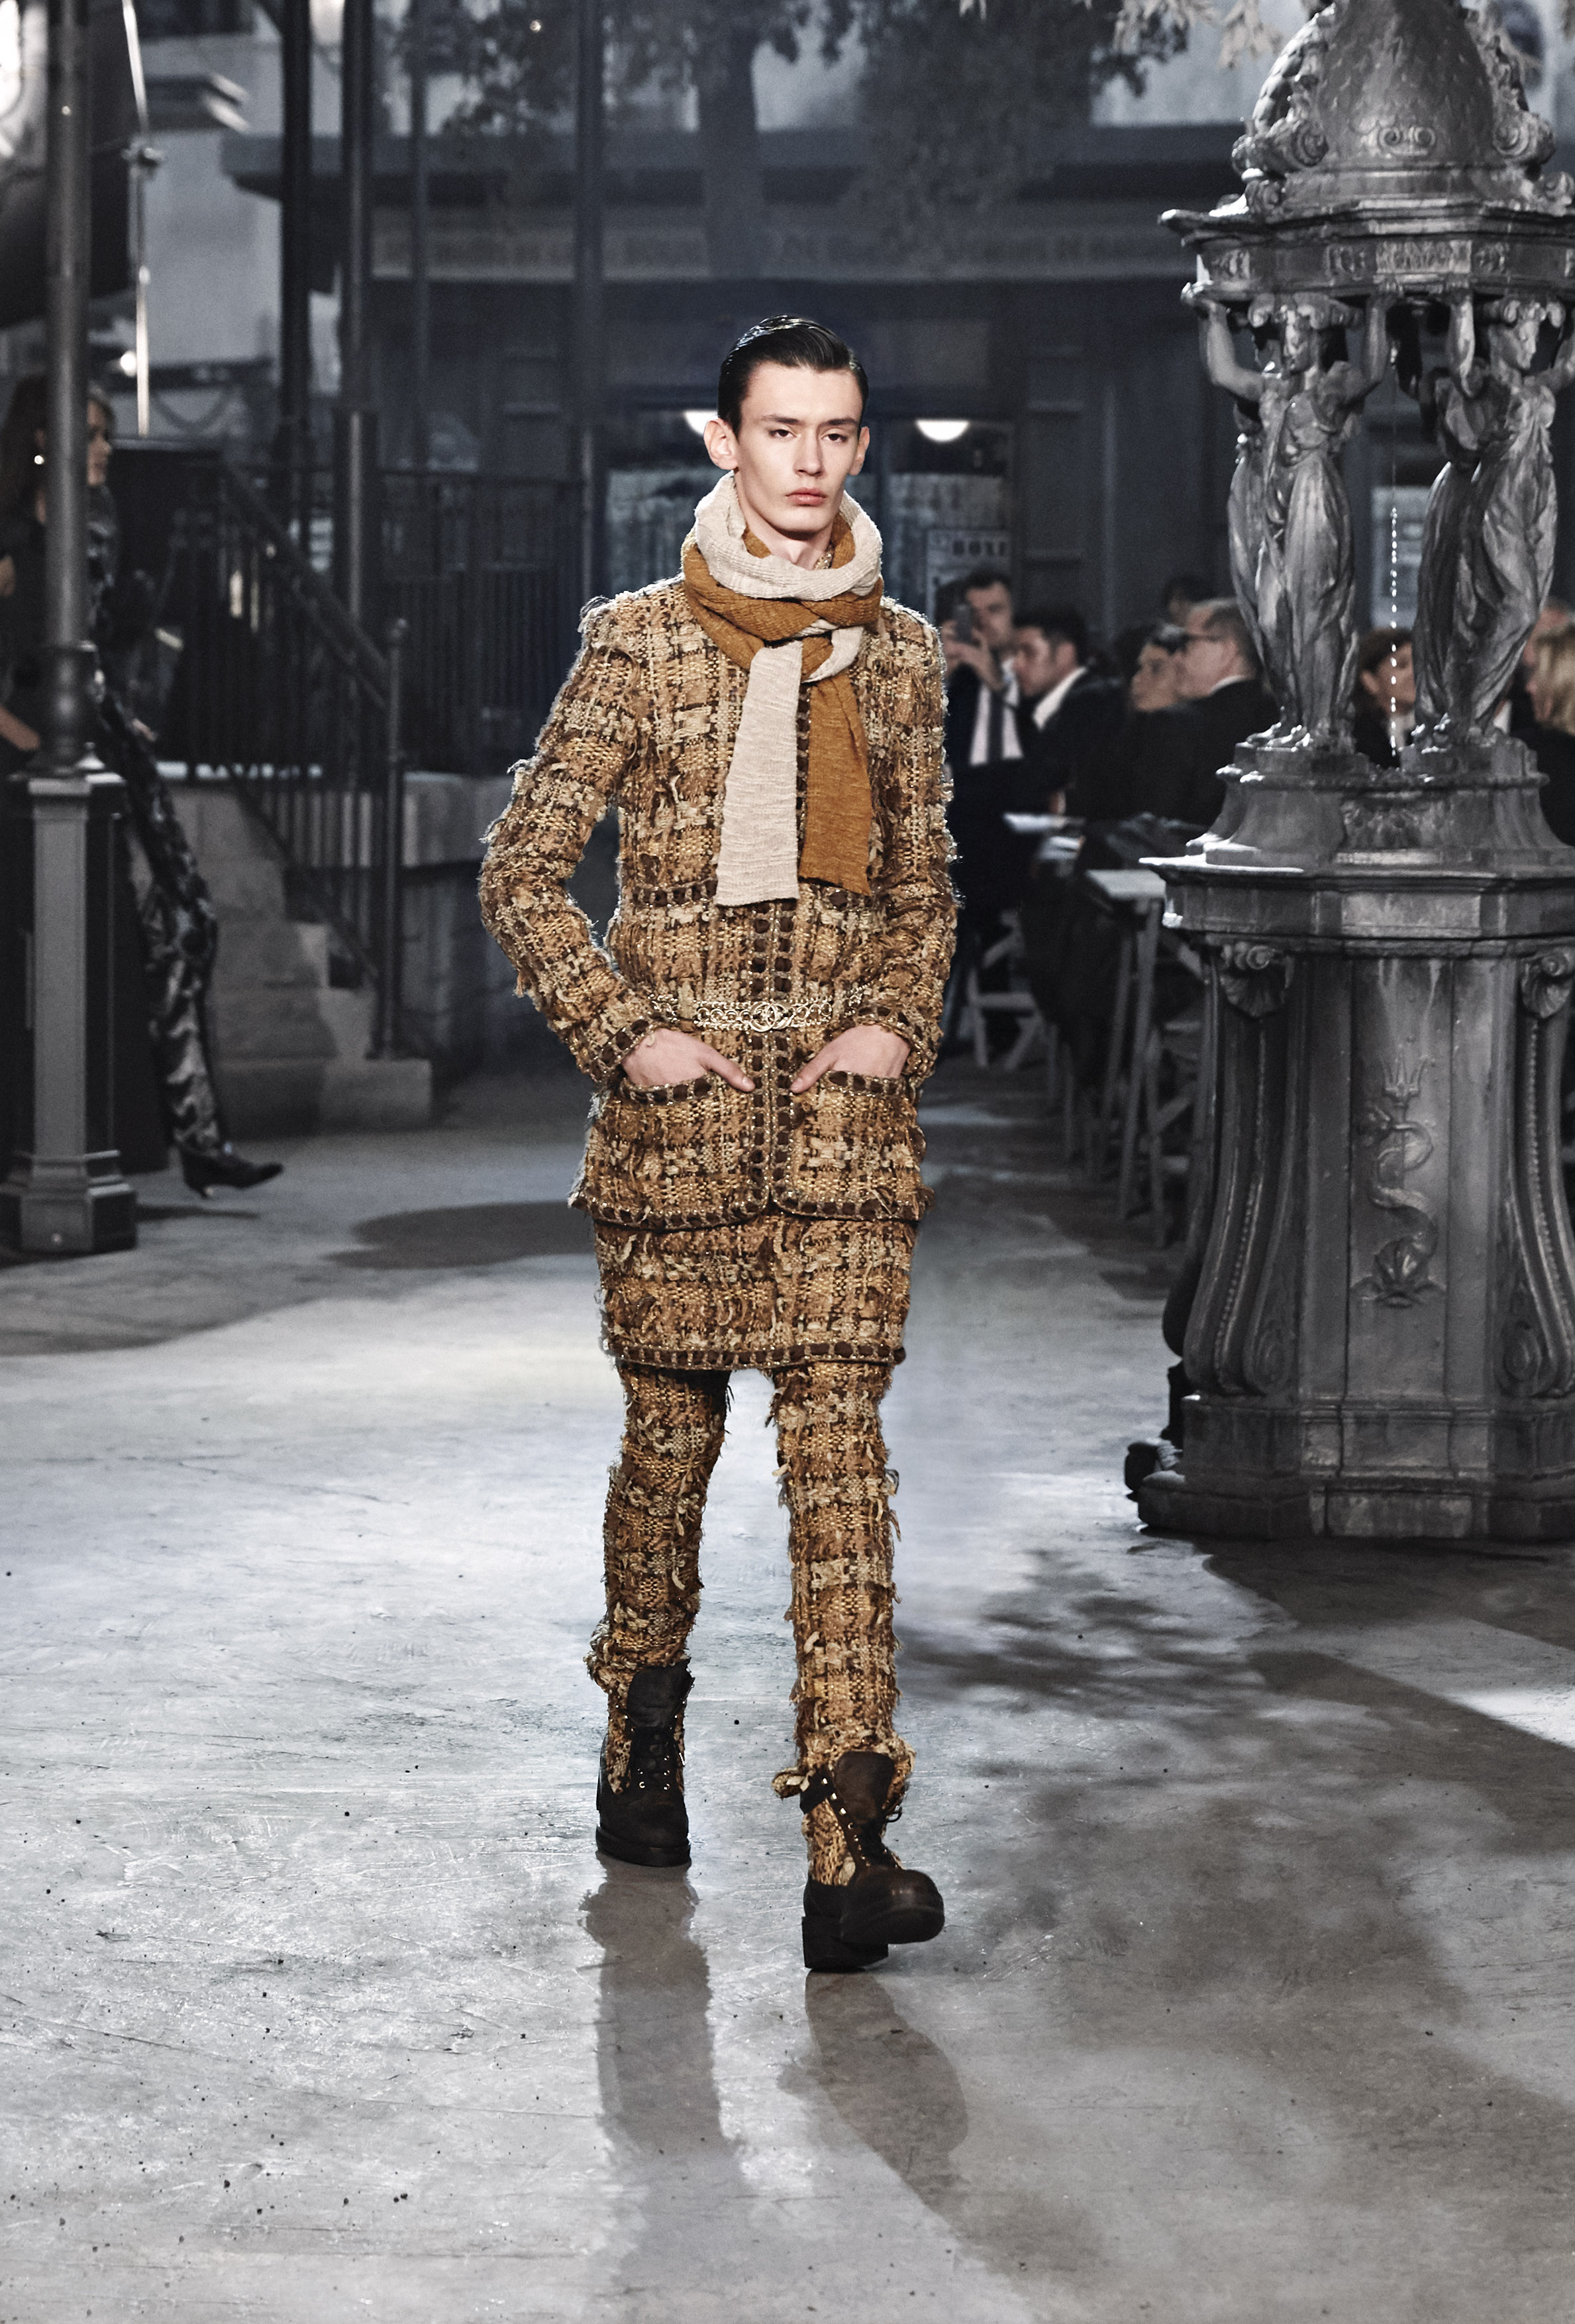 Coco Chanel 2015-2016 metiers